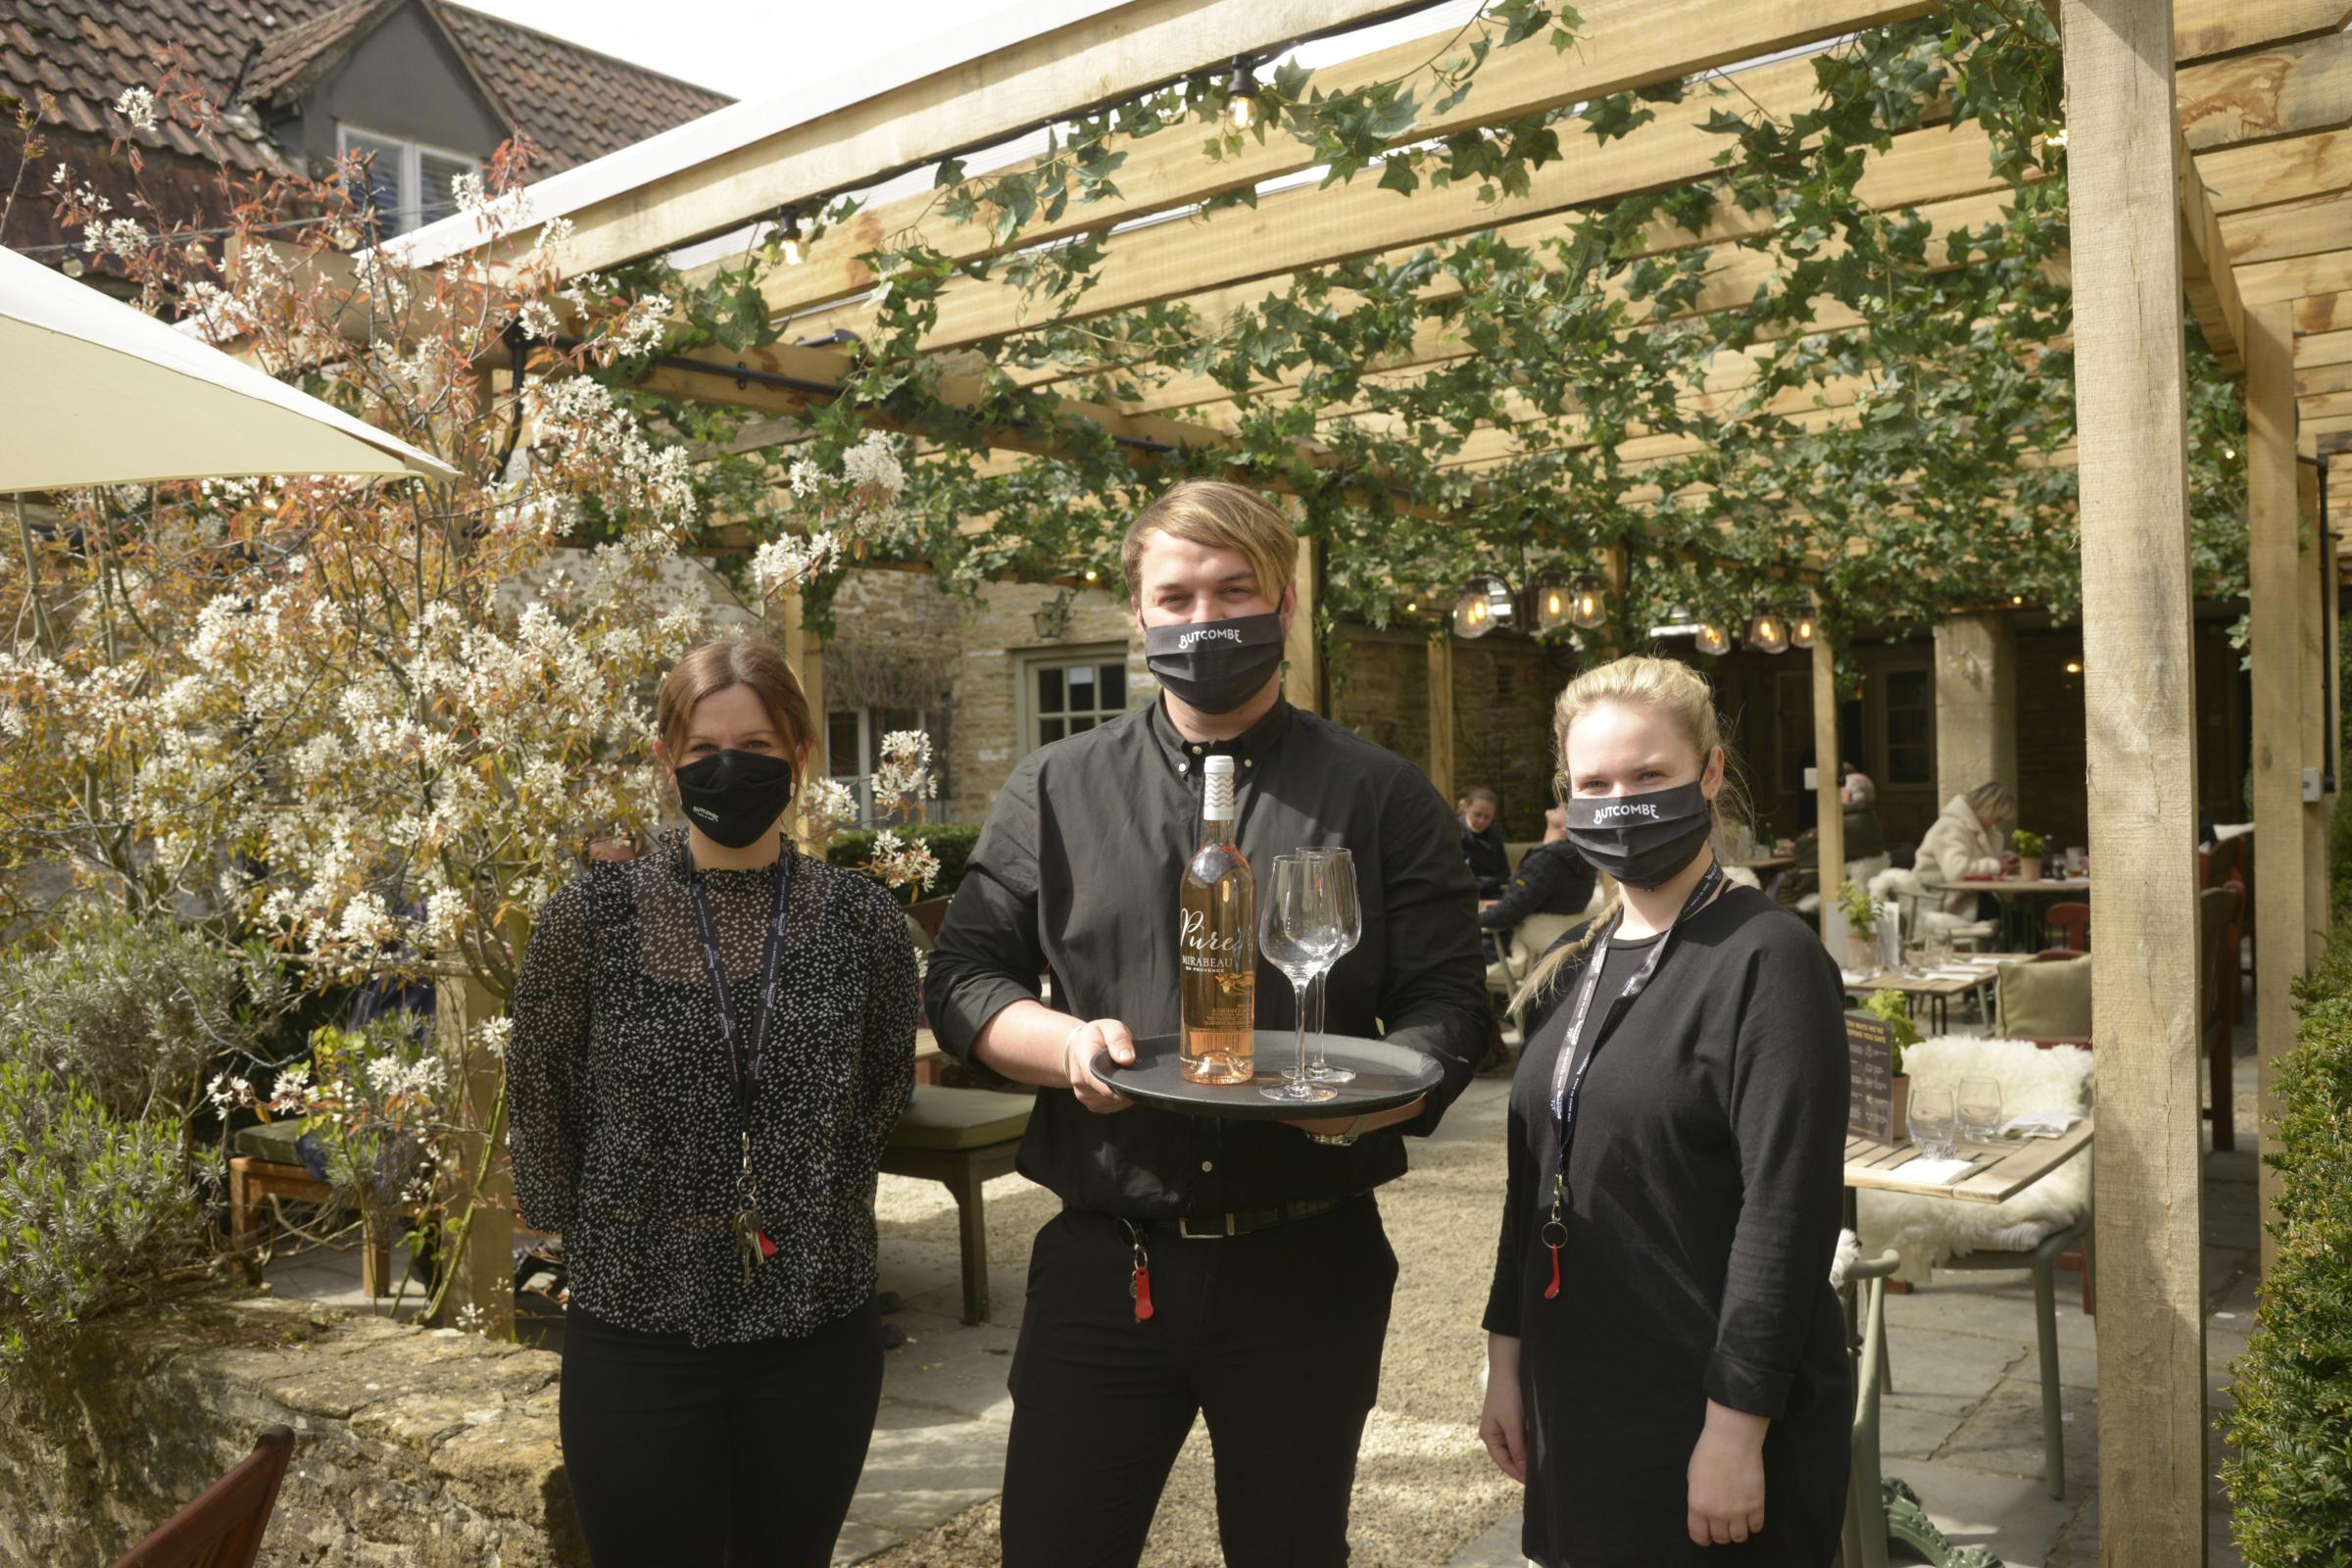 Methuen Arms Corsham Sam Priest with staff Steph Burgess and Ashleigh Hayes at the Courtyard at the Methuen Arms Corsham Photo Trevor Porter 67346 1